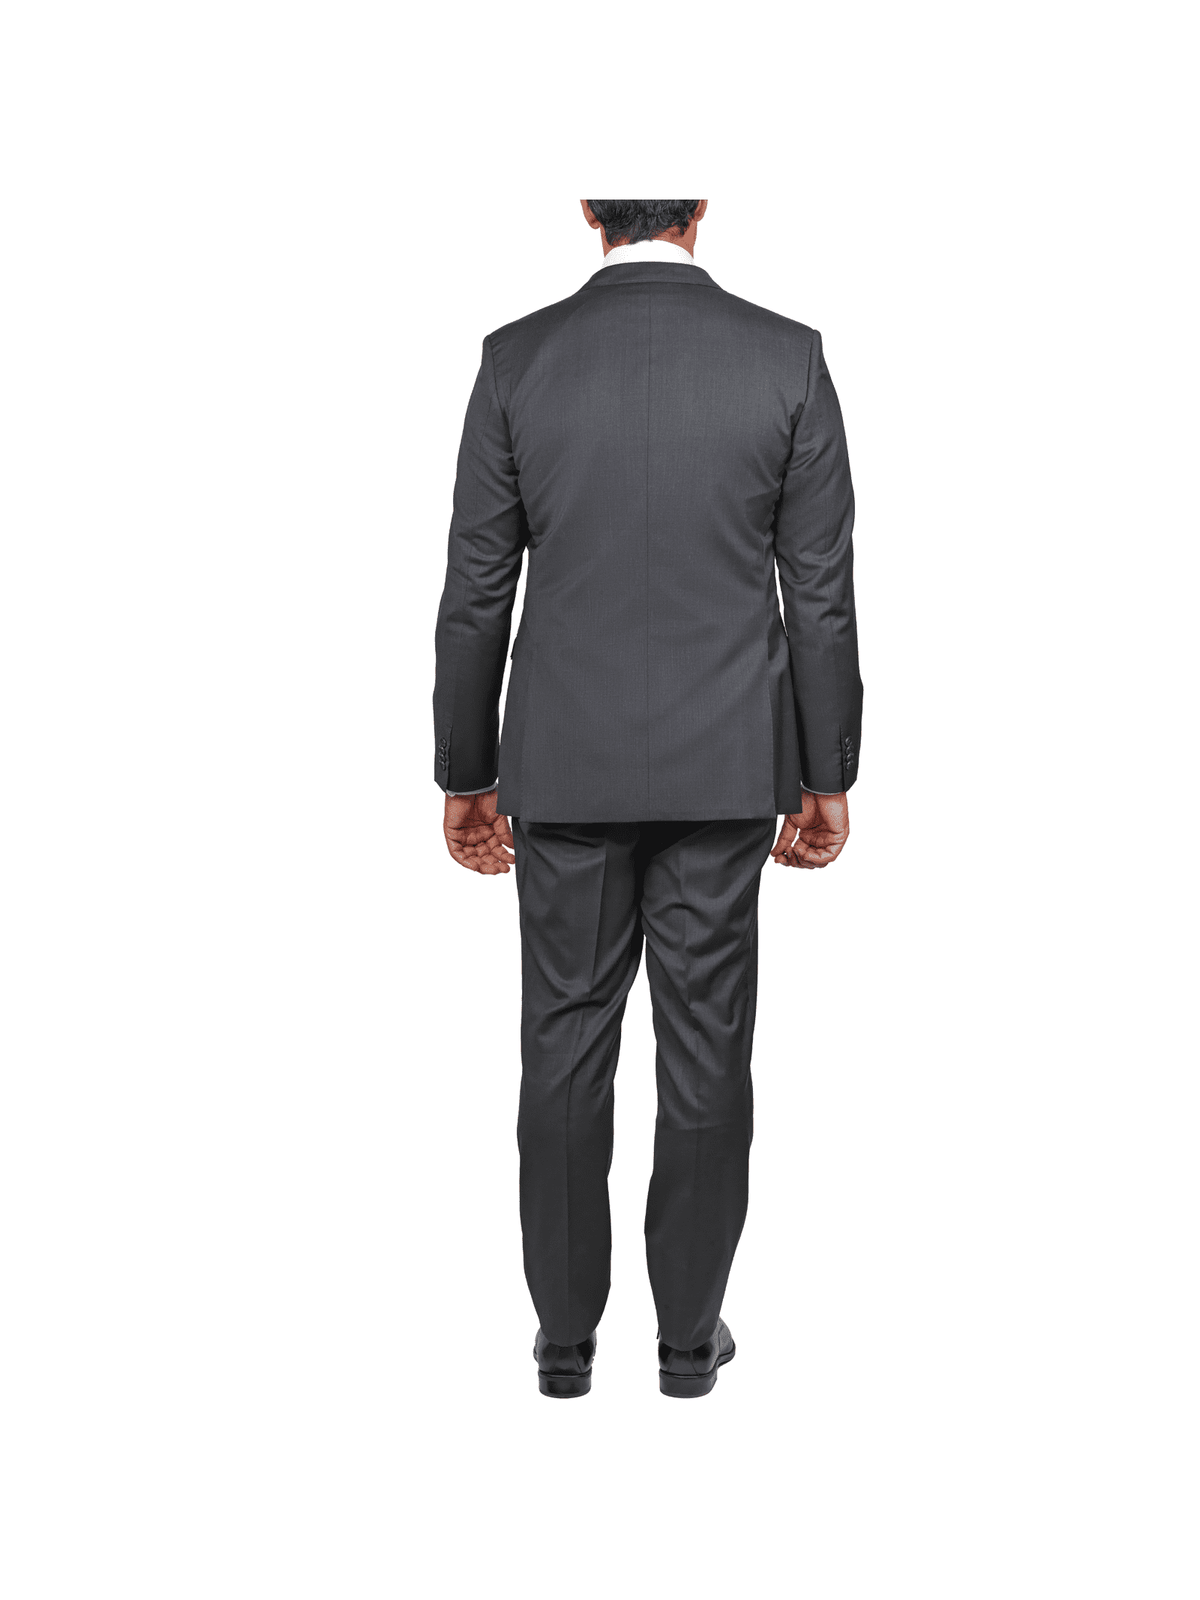 Blujacket SUITS Blujacket Mens Charcoal Grey 100% Marzotto Wool Trim Fit Suit